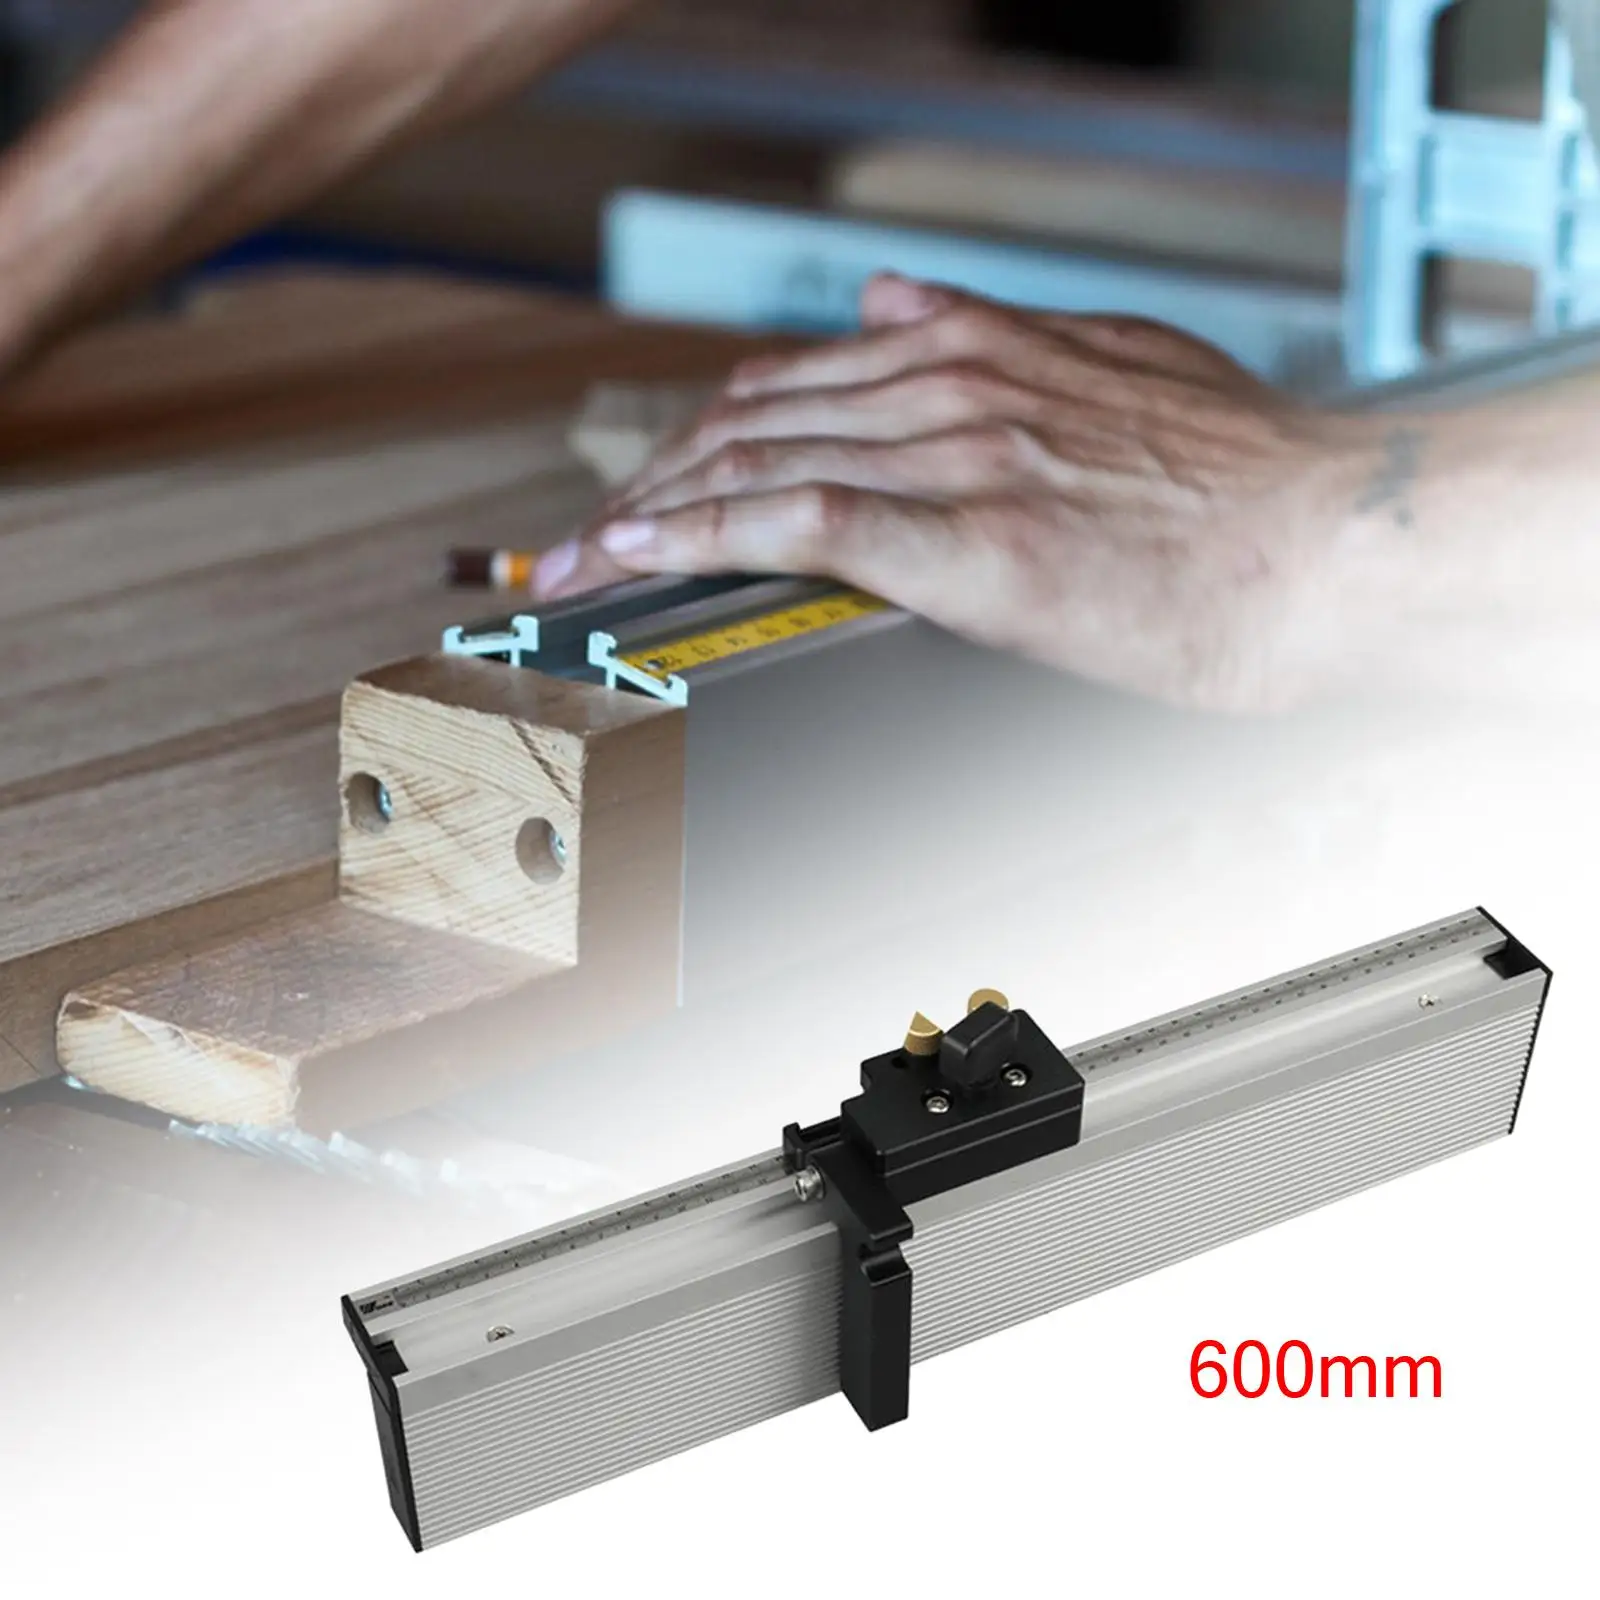 Aluminum T Tracks Slot Woodworking Benches Table Accurate Miter Track with Miter Gauge Aluminium Profile Fence Sliding Brackets